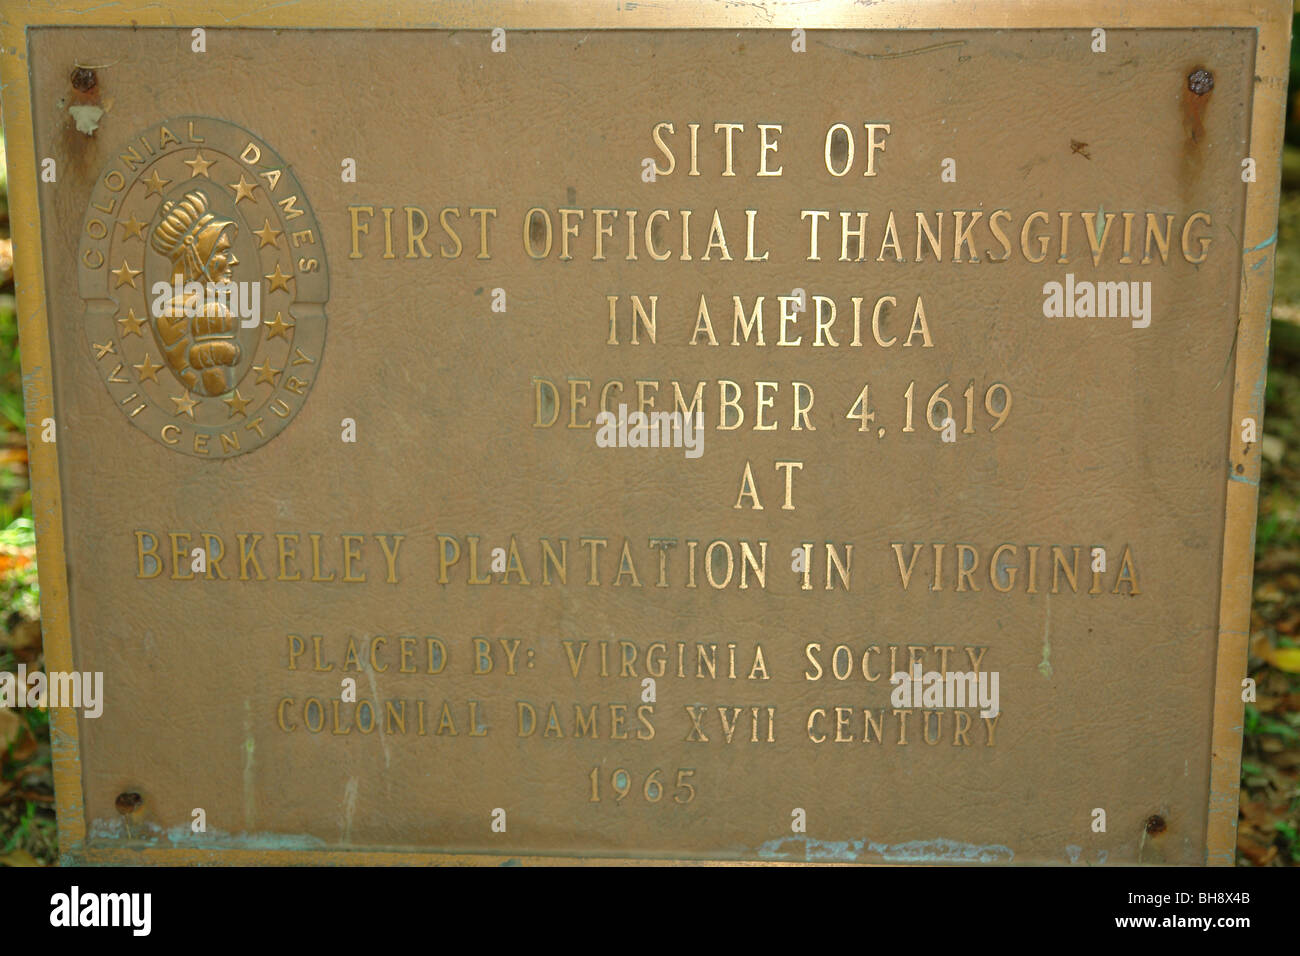 AJD64141, Charles City, VA, Virginia, Berkeley Plantation, Site of First Official Thanksgiving in America, Historical Marker Stock Photo